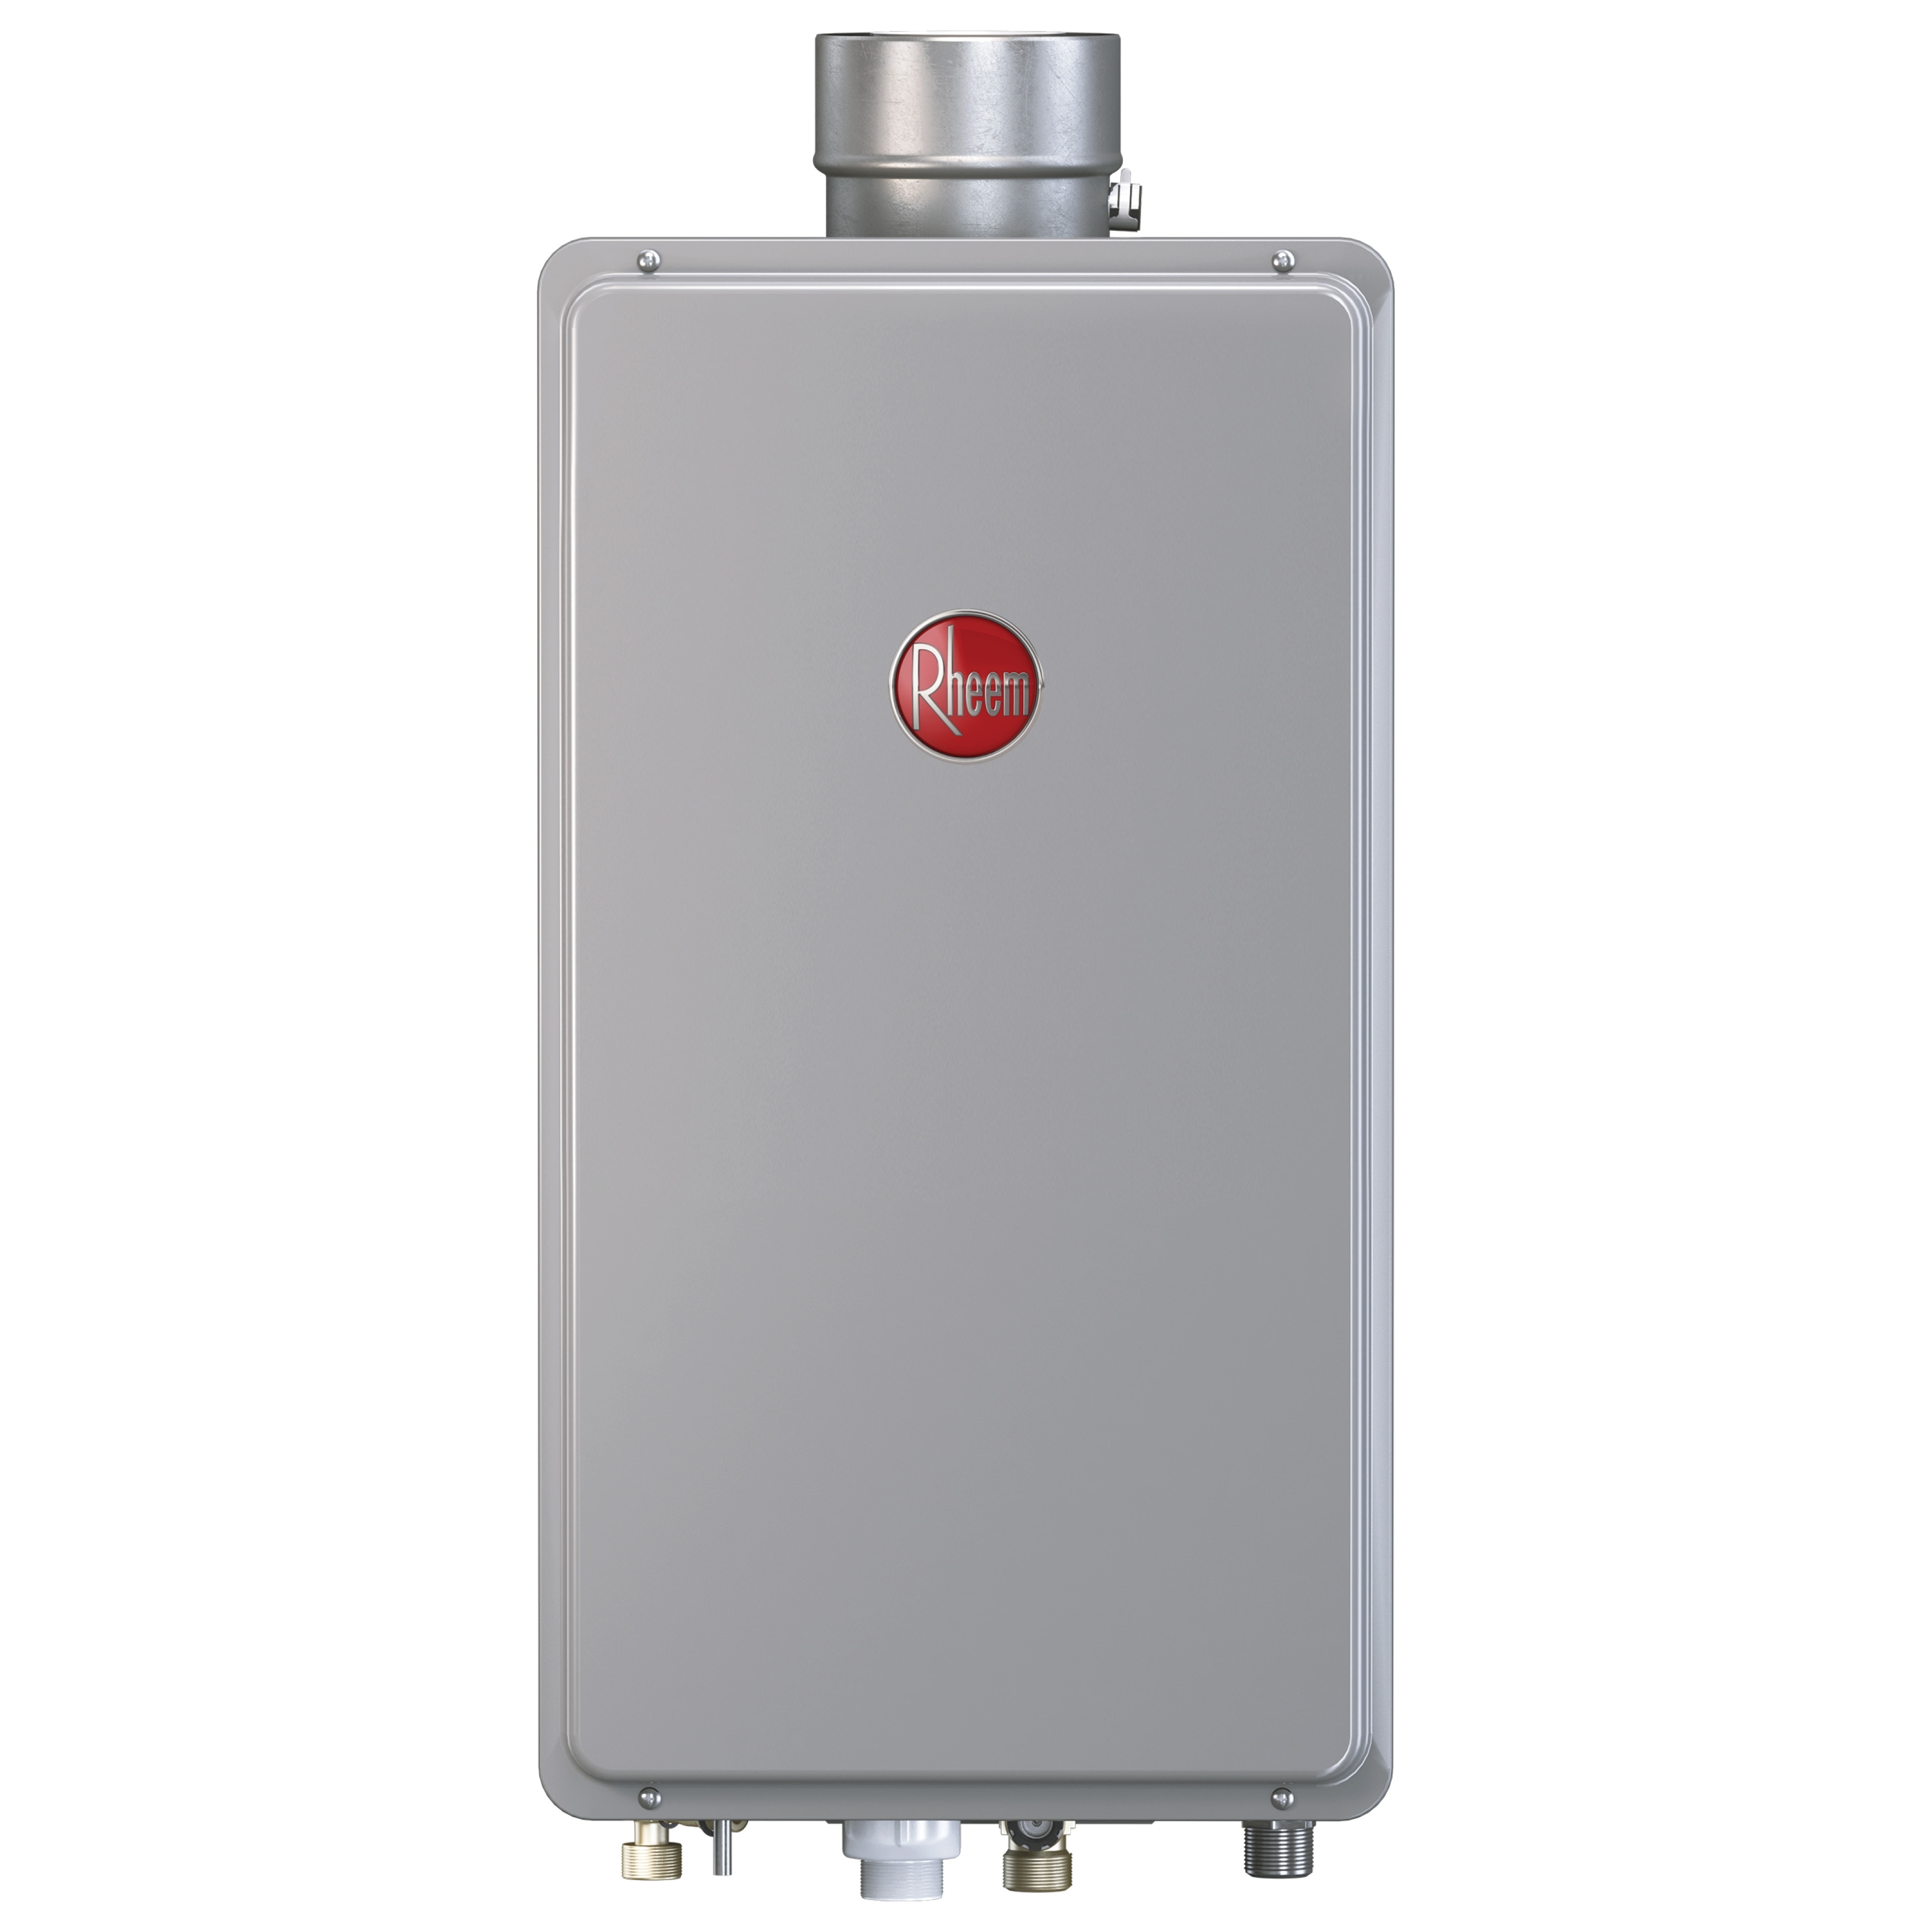 https://ak1.ostkcdn.com/images/products/is/images/direct/faee50500aded2a69e91d3ab6e7d839ce9bd555e/Rheem-Mid-Efficiency-8.4GPM-Indoor-Natural-Gas-Tankless-Water-Heater.jpg